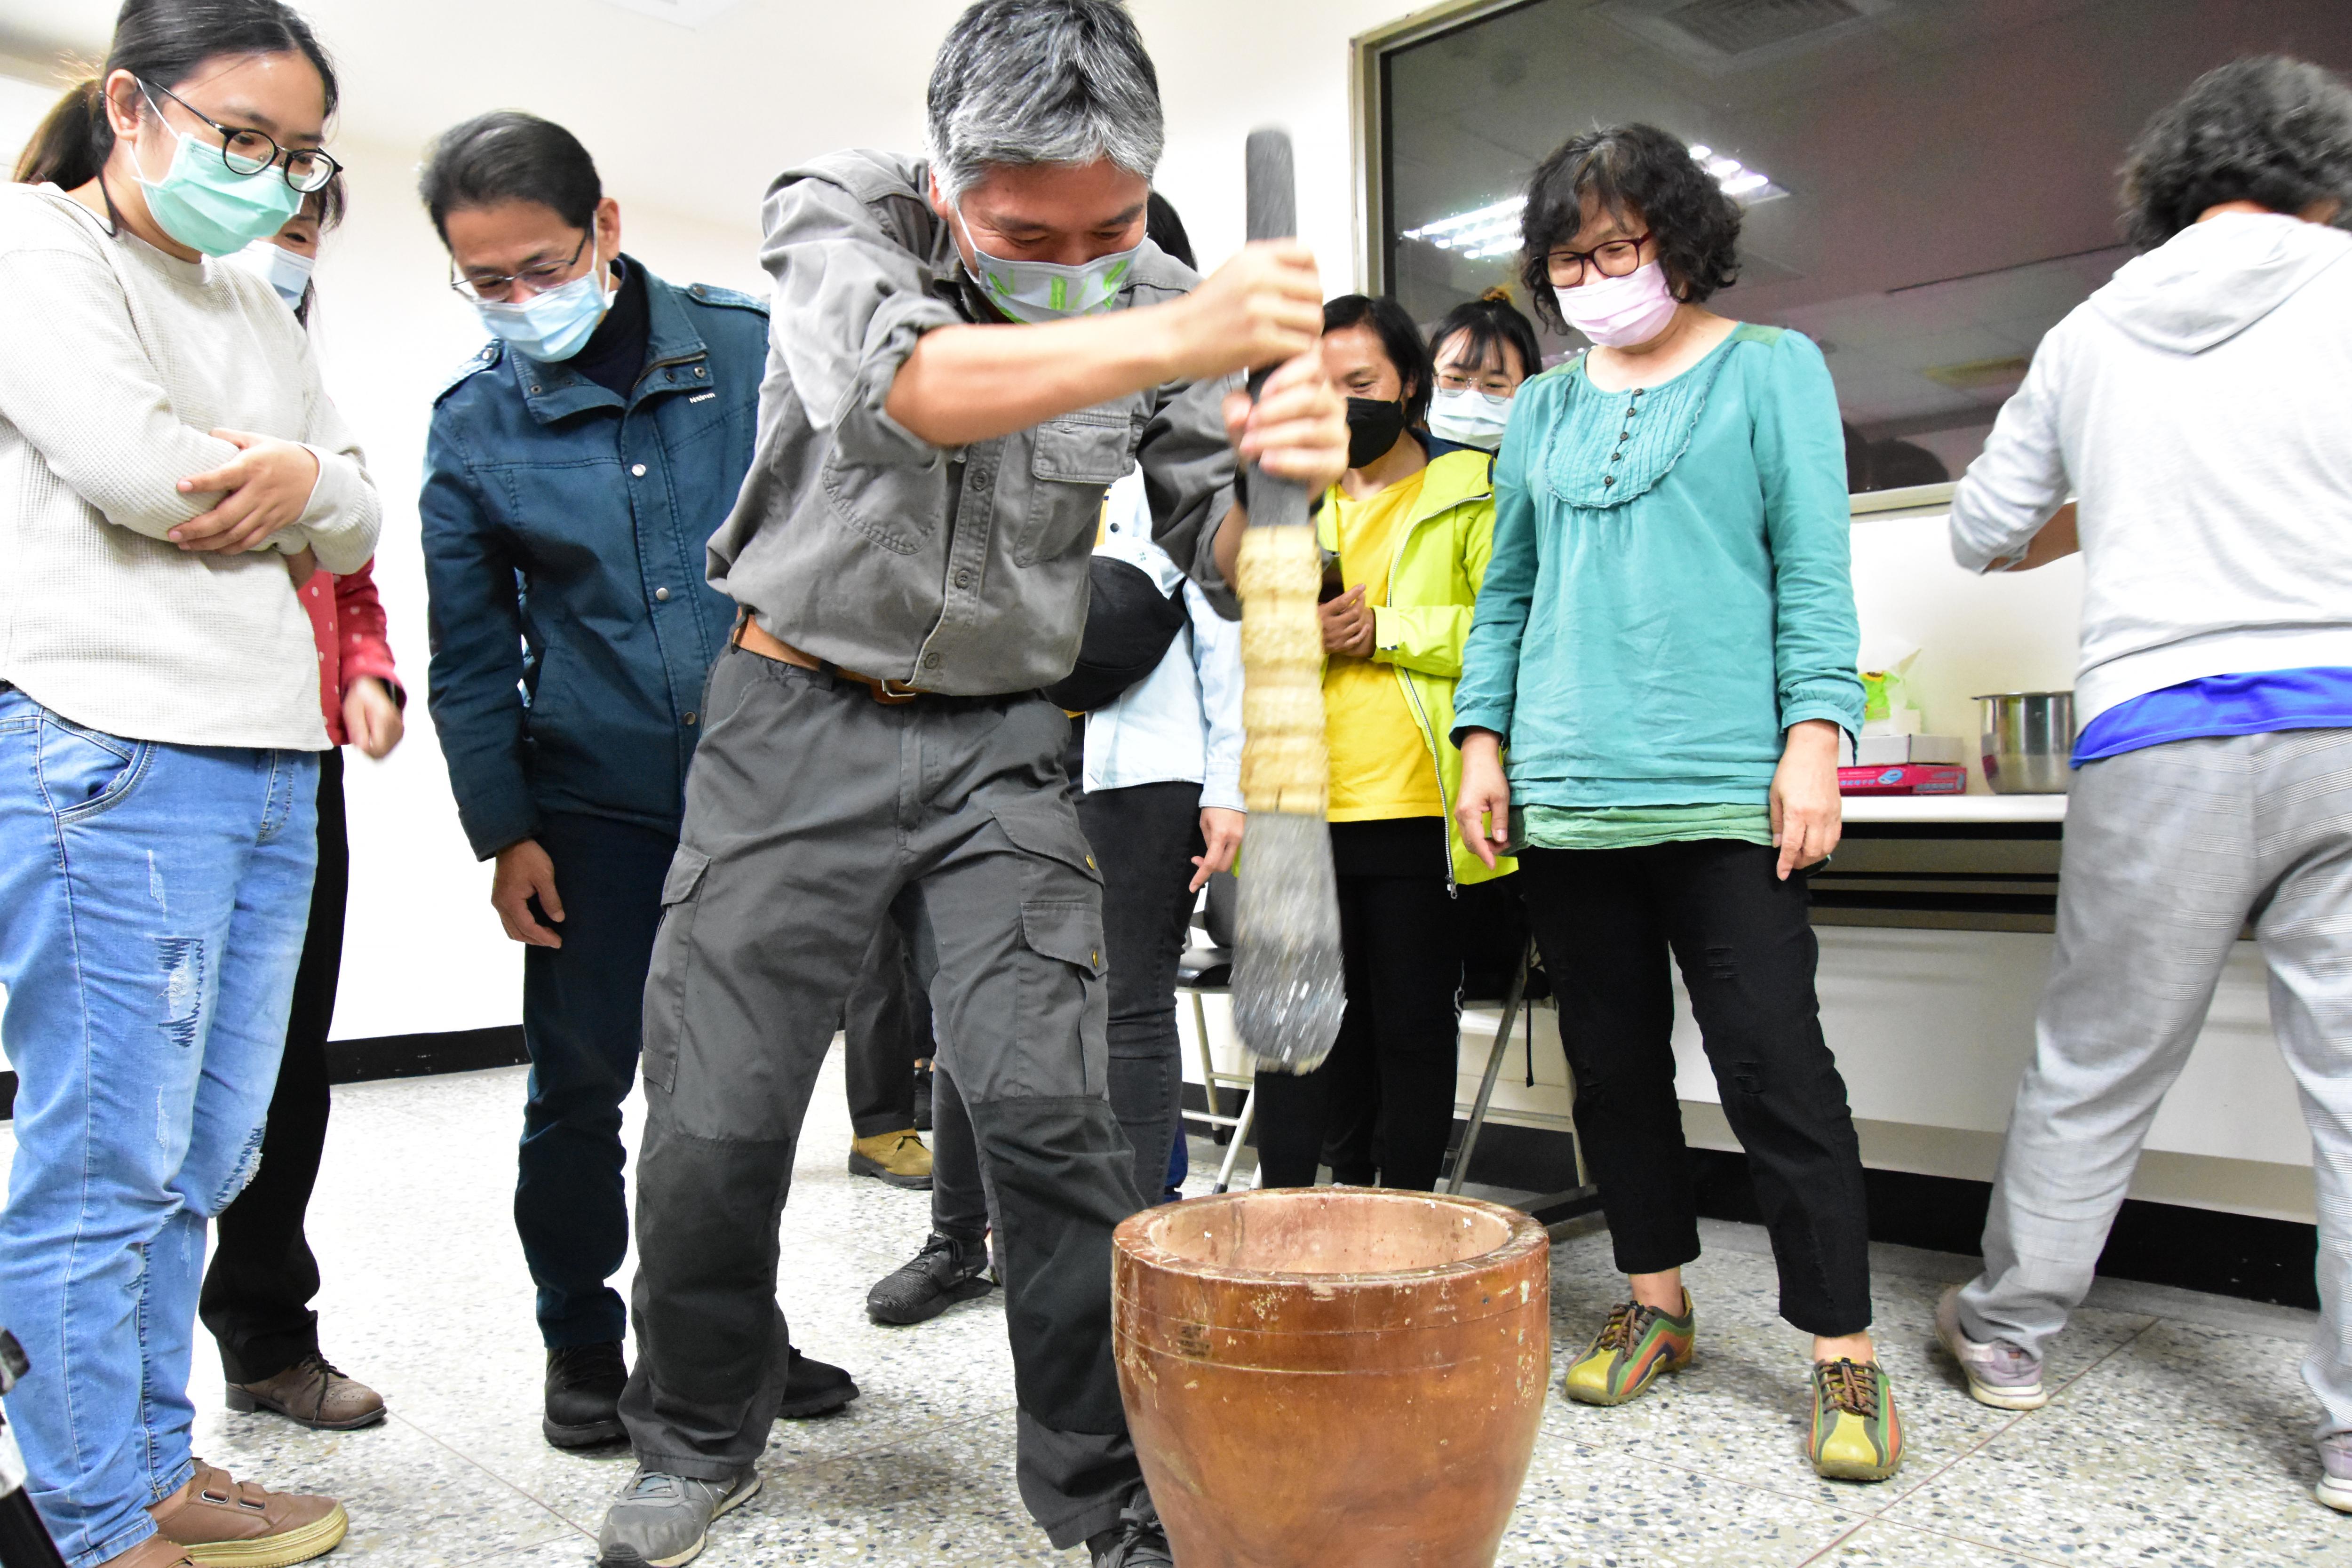 Figure 2. TTDARES staff members take turns pounding rice with a pestle to make rice flour.